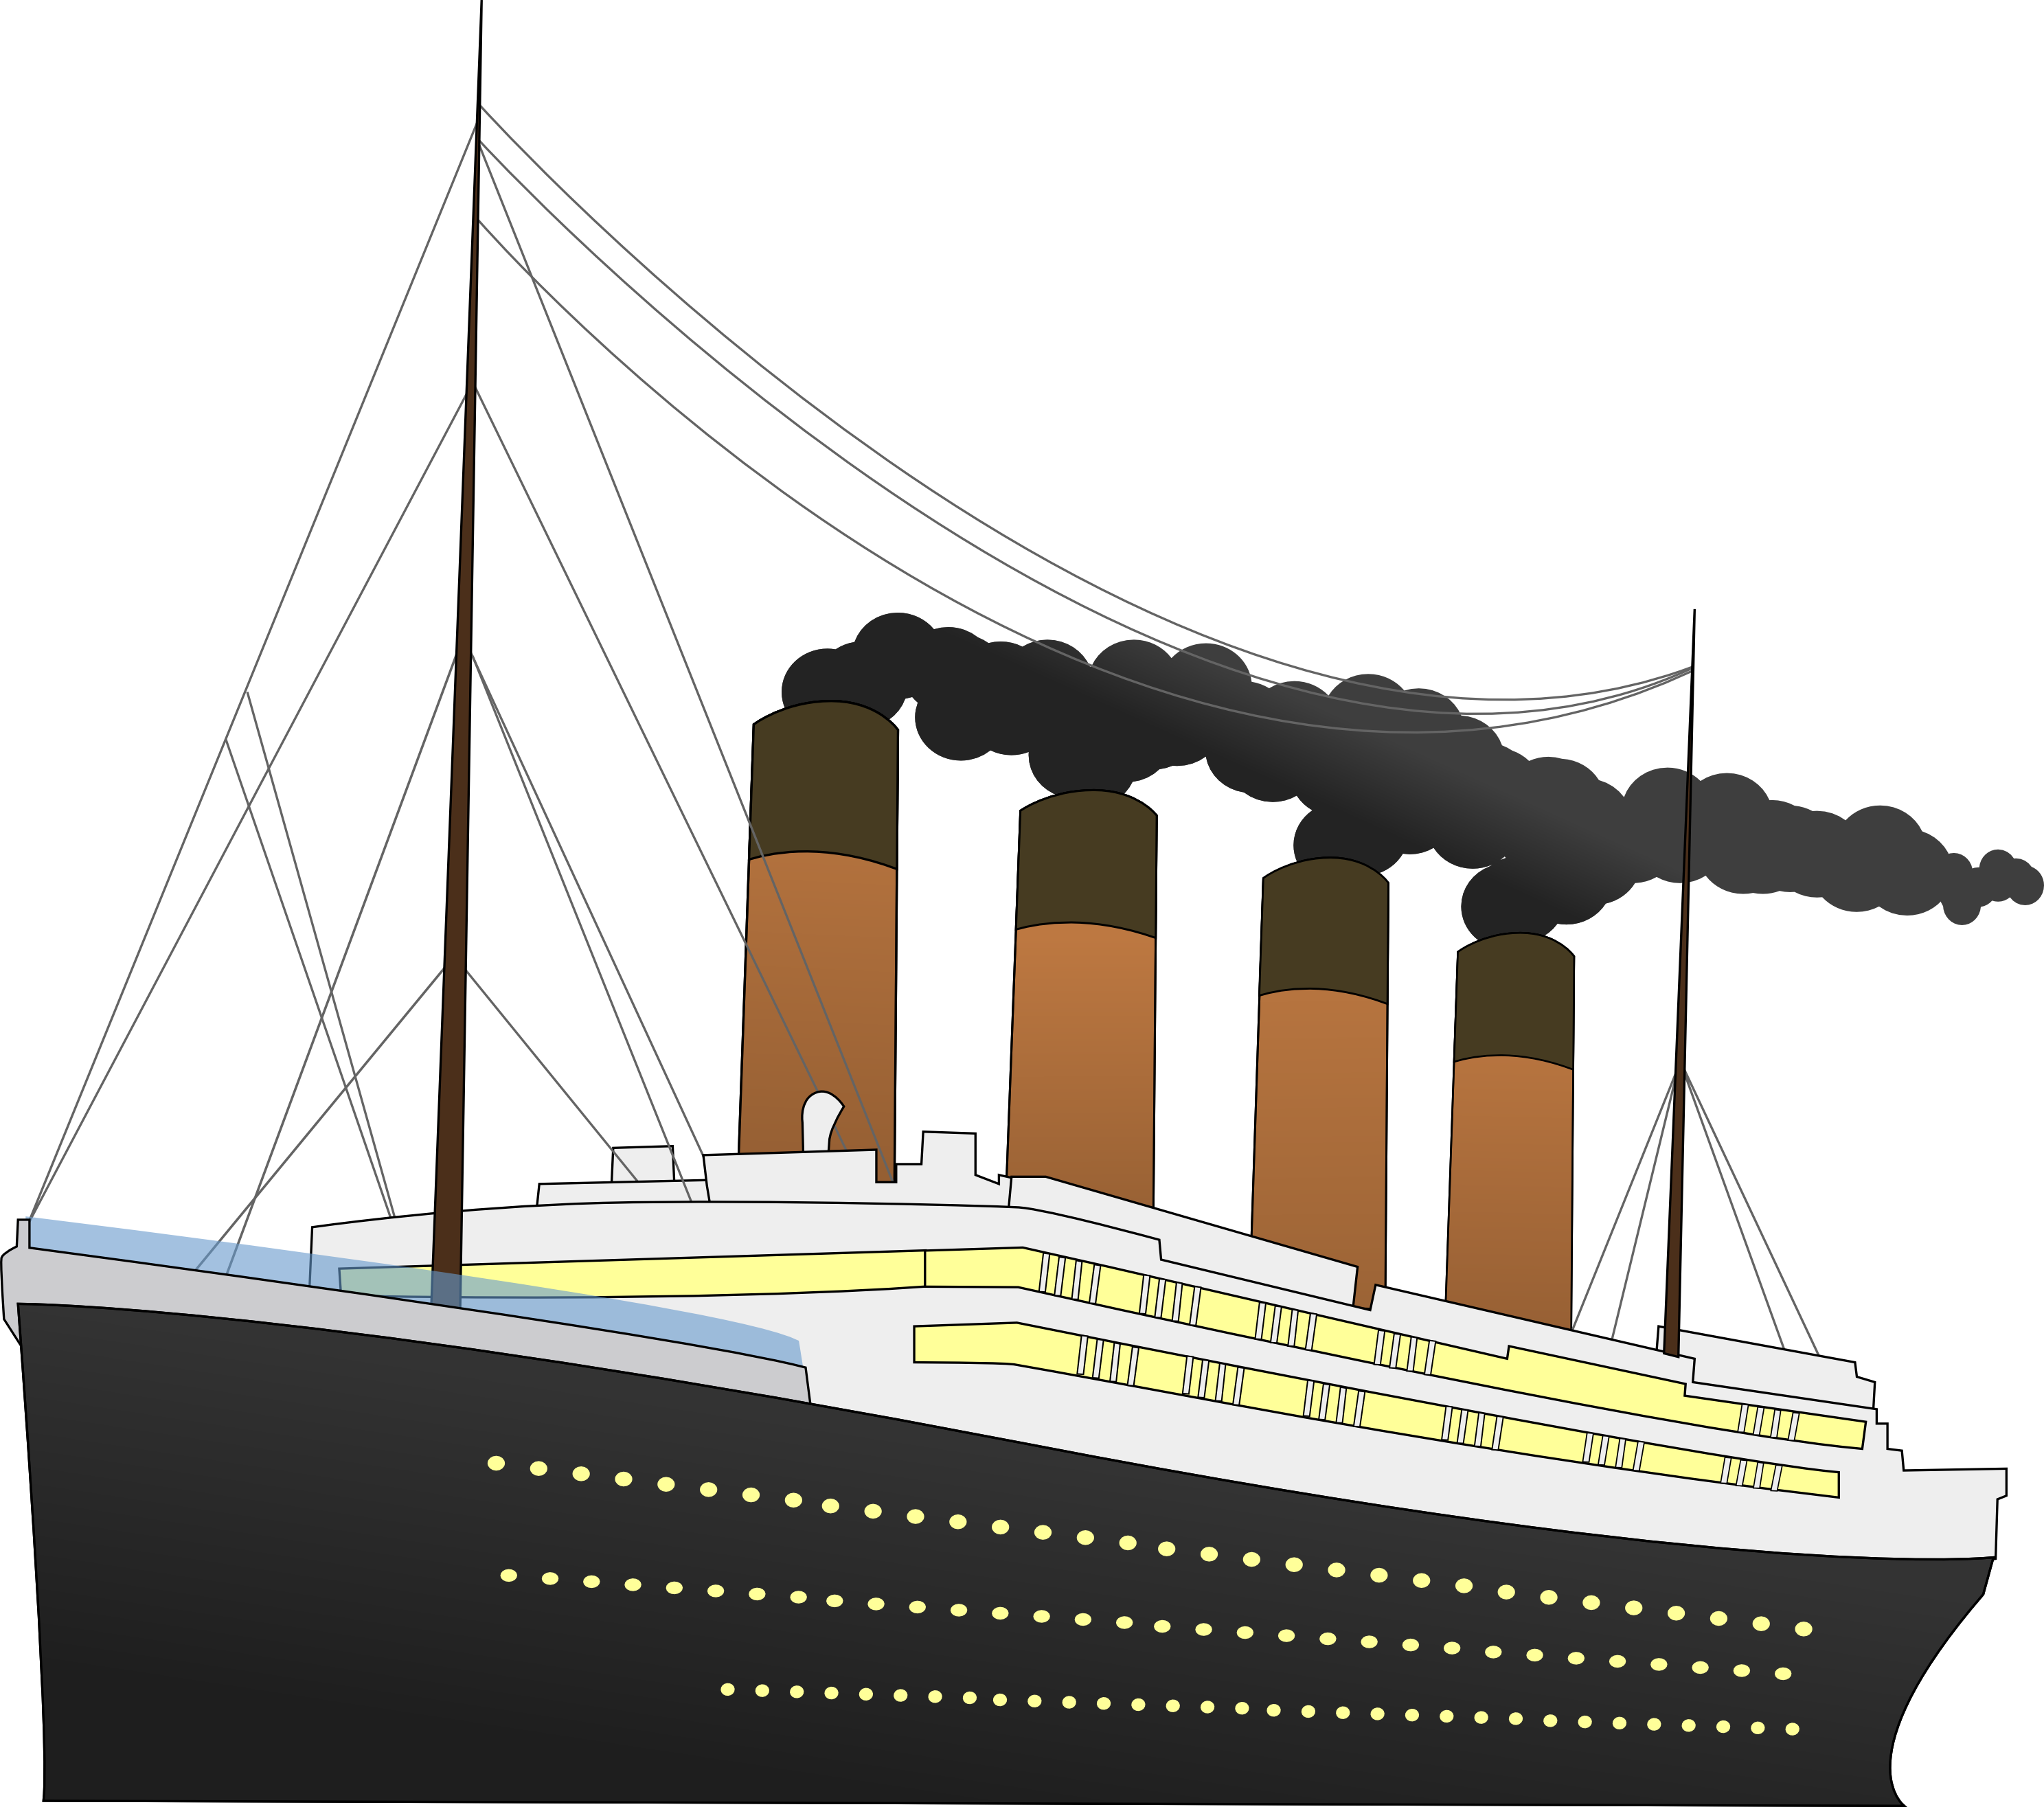 R.M.S. Titanic: from a drawing to a sinking